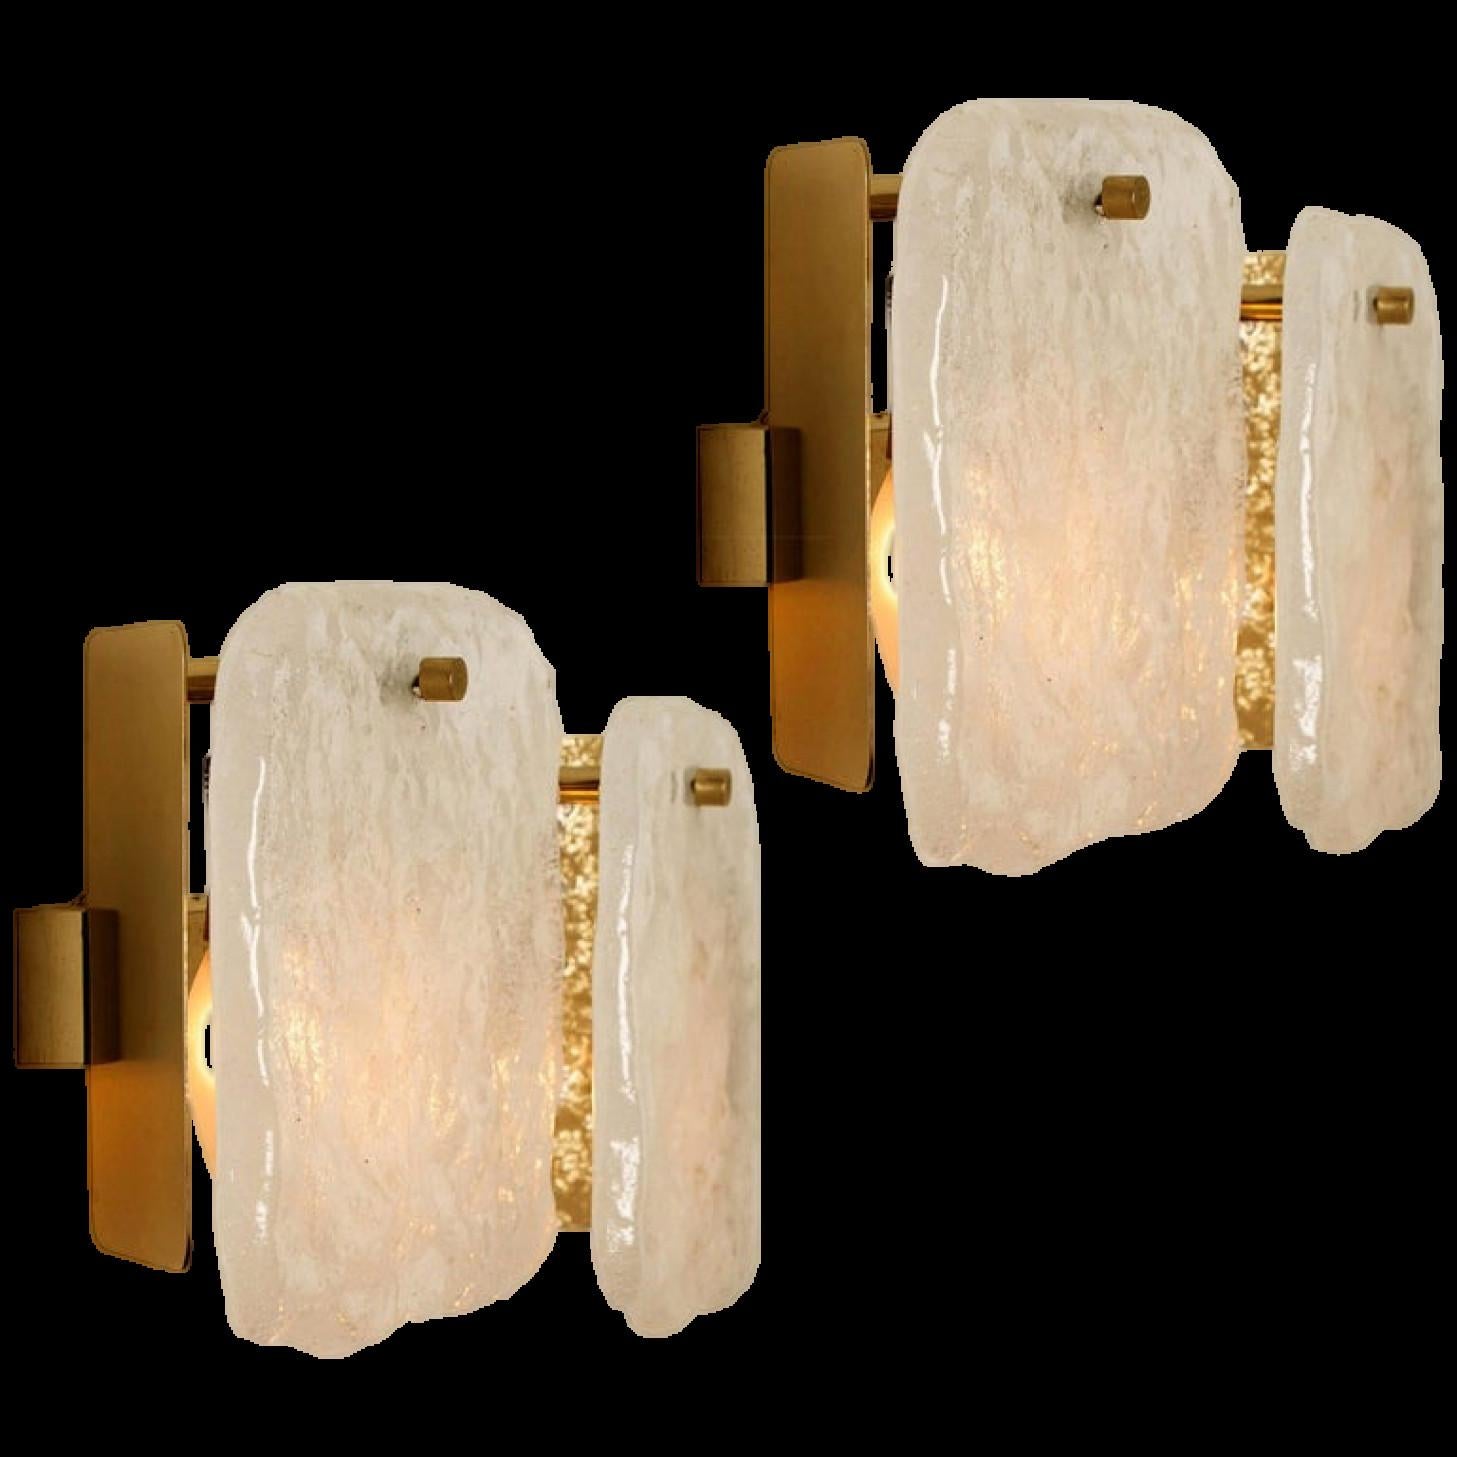 A stunning pair of light fixtures designed by J.T Kalmar, manufactured by Kalmar Franken, Austria in the 1960s.
High-end and handmade design from the 20th century. The large squares of white, opaque textured glass shades provides a nicely diffuse